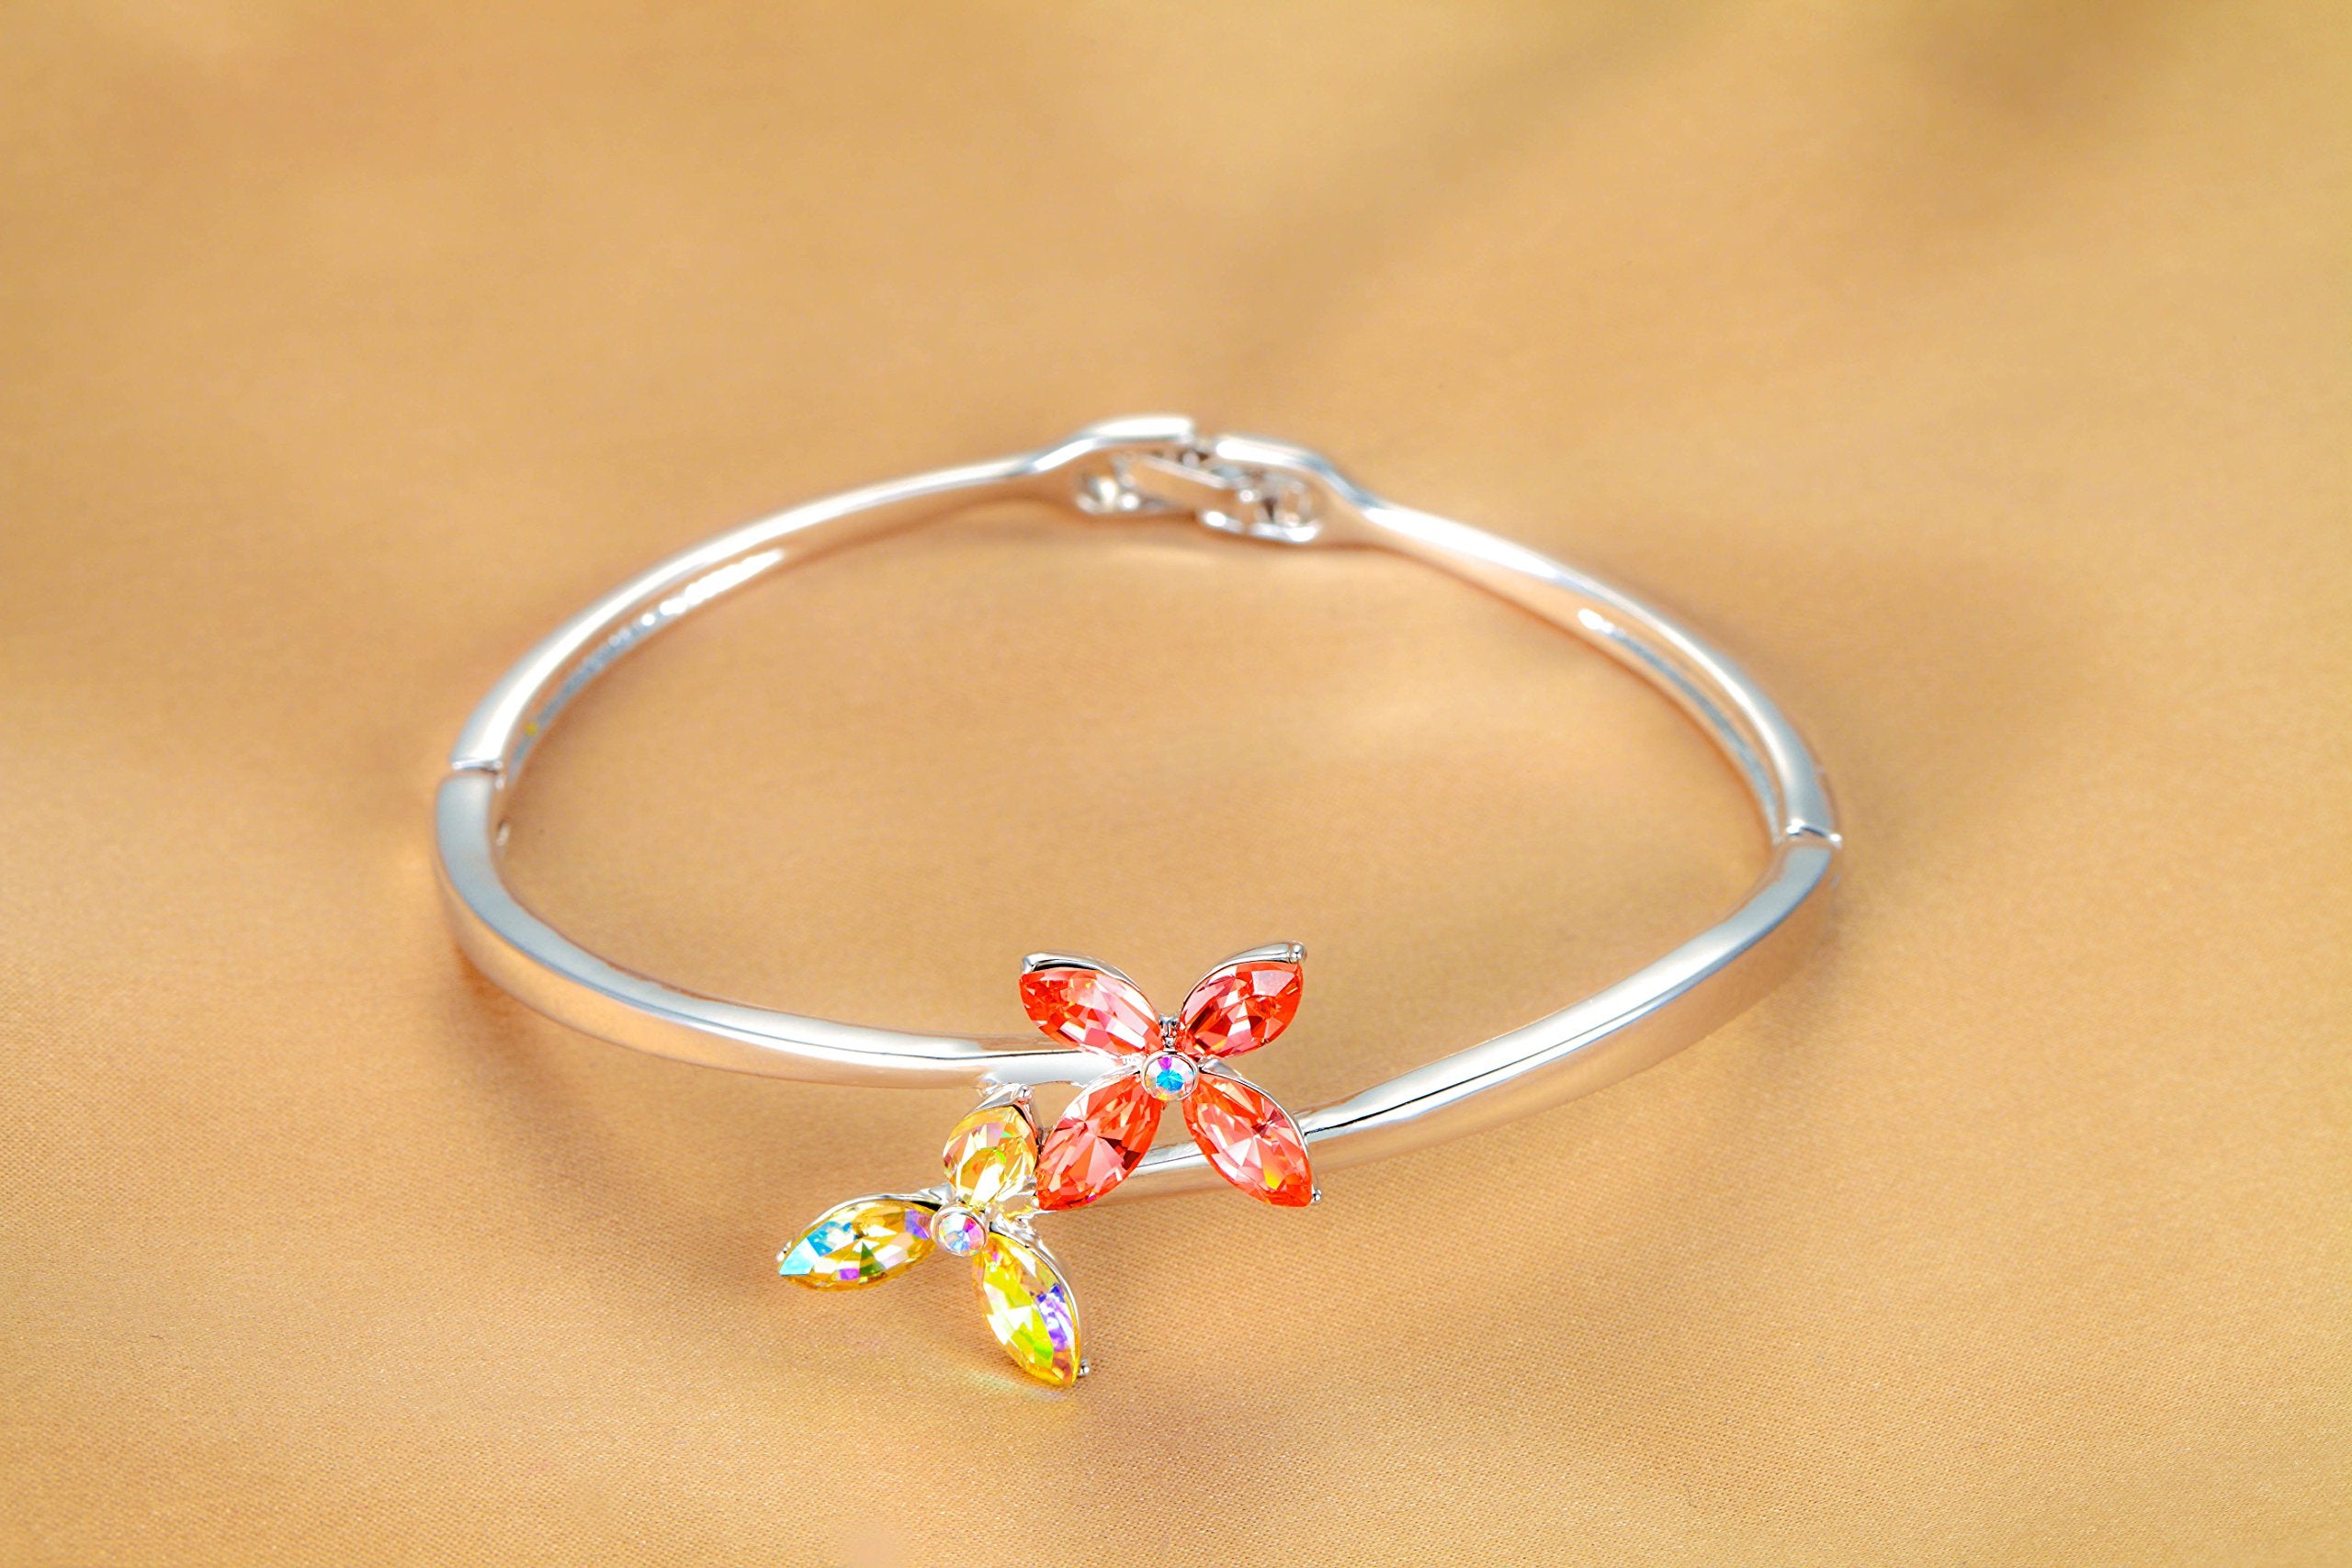 Yellow Chimes Crystals from Swarovski Multicolor Crystal Flower Designer Bracelet for Women and Girls